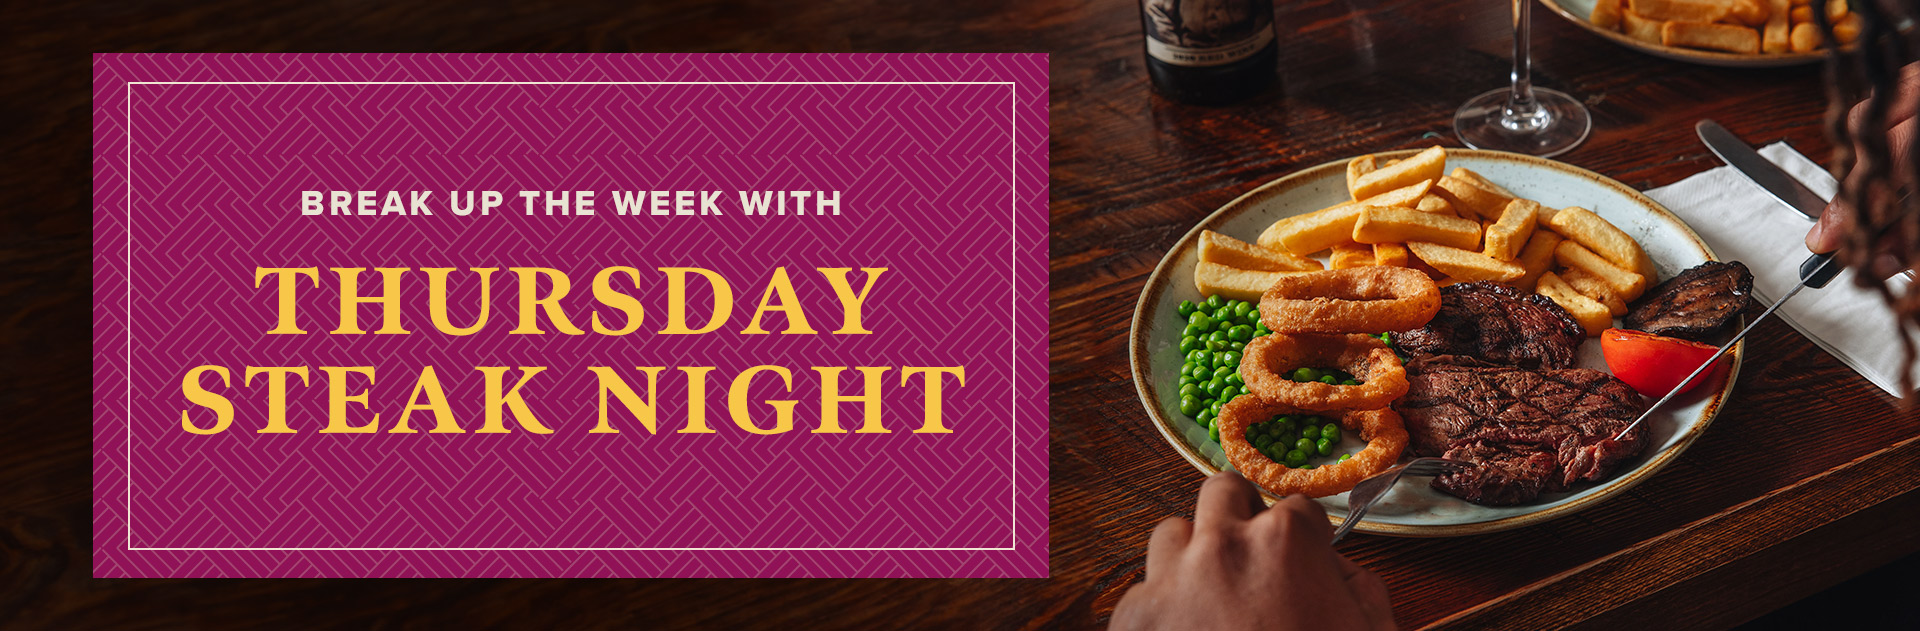 Thursday Steak Night at Red Lion, Lindfield